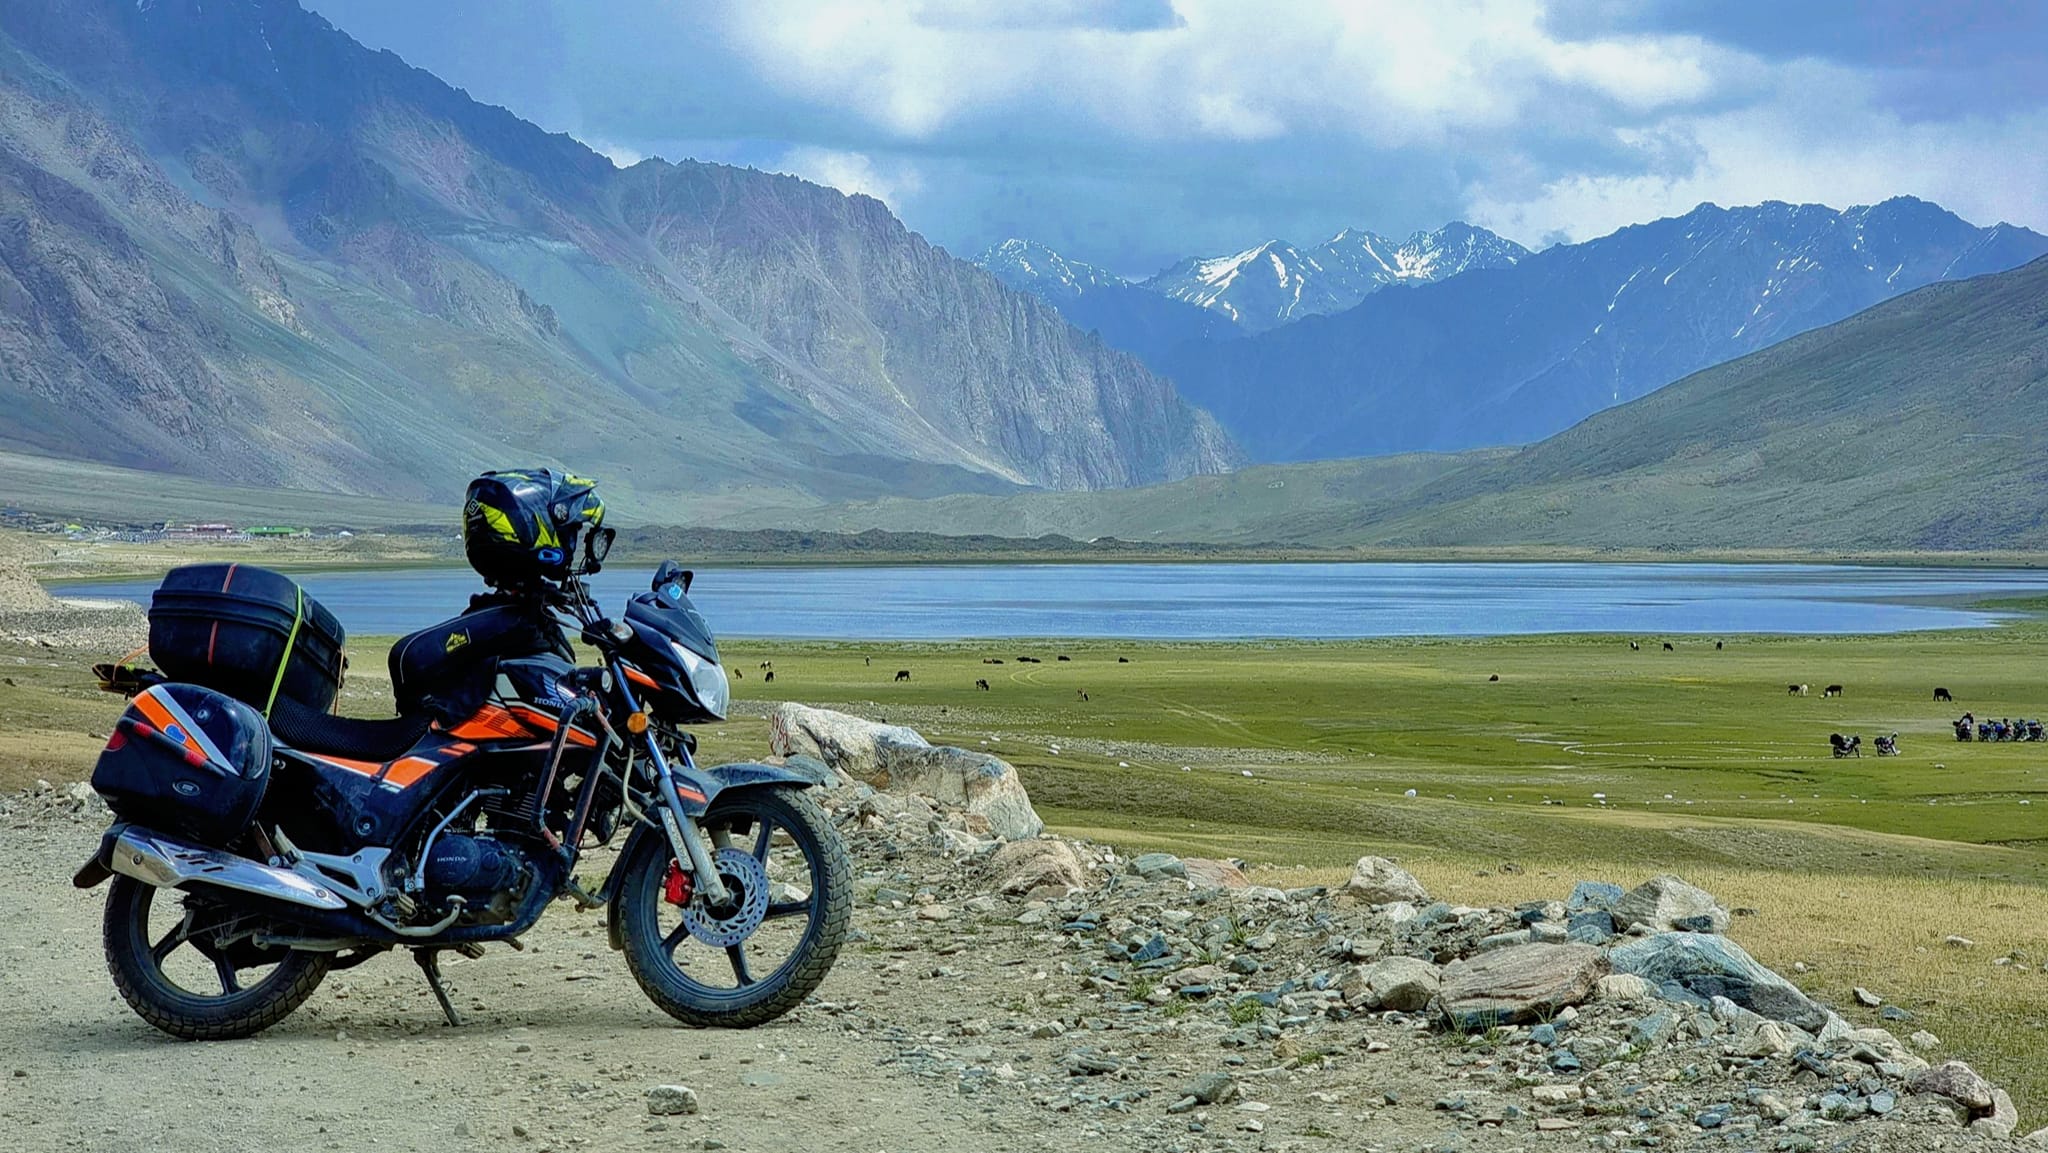 Is Honda CB150F best for touring in Pakistan?